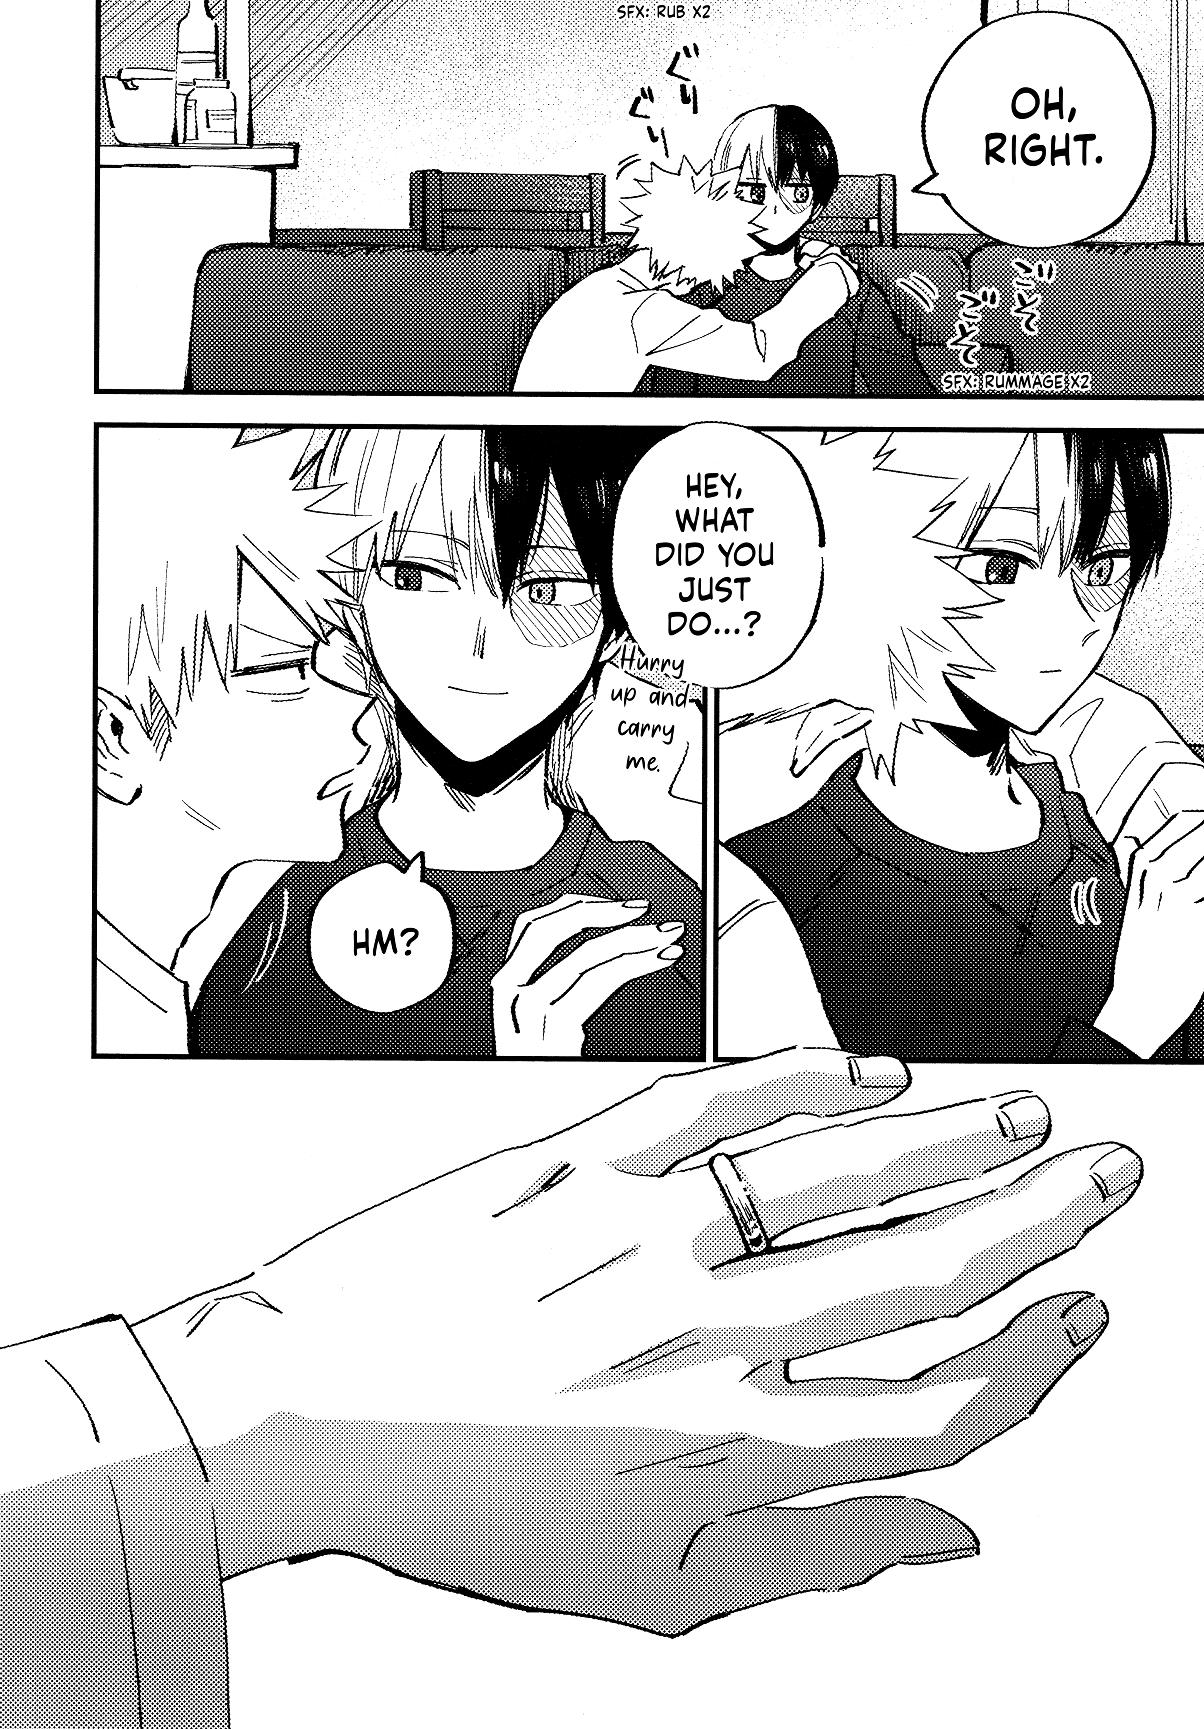 Cheers! - Shouto X Katsuki Marriage Anthology Vol.1 Chapter 11: An Impulsive Moment - Picture 3